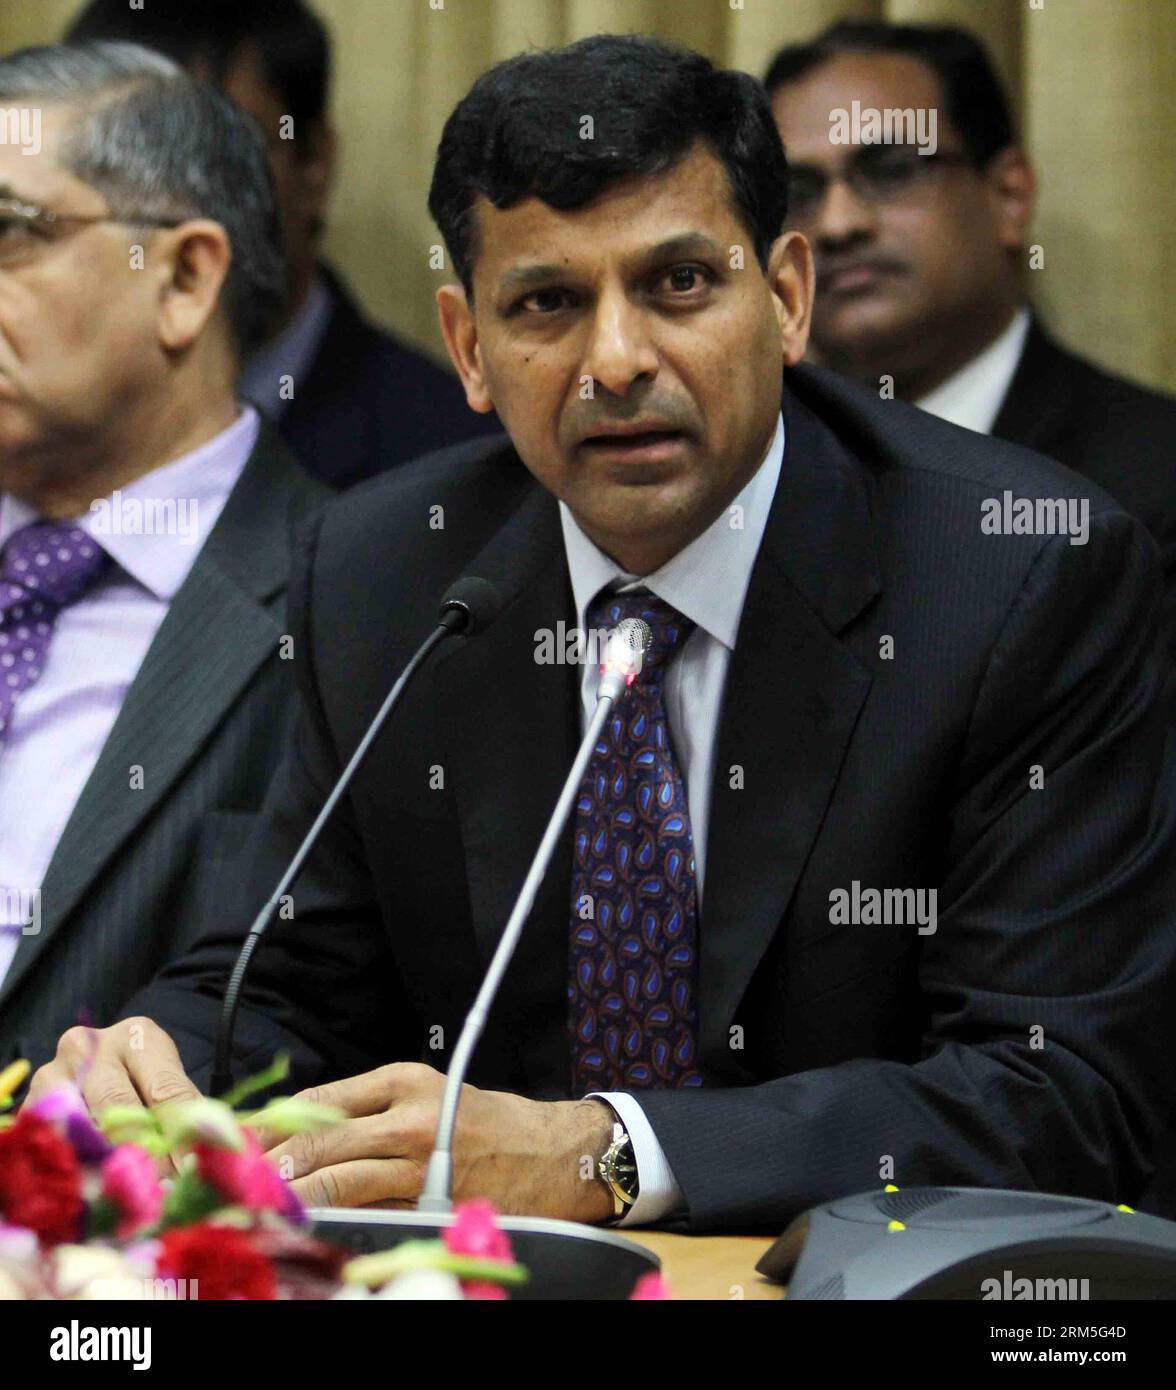 Bildnummer: 60651389  Datum: 29.10.2013  Copyright: imago/Xinhua (131029) -- MUMBAI, Oct. 29, 2013 (Xinhua) -- Governor of the Reserve Bank of India (RBI) Raghuram Rajan addresses the second quarter review of the monetary policy for 2013-14 at the RBI headquarters in Mumbai, India, Oct. 29, 2013. India s central bank, the Reserve Bank of India, Tuesday hiked a key policy interest rate by 0.25 percent in less than two months to curb inflation and slumping of the rupee. (Xinhua/Stringer)(lrz) INDIA-MUMBAI-BANK-RATE PUBLICATIONxNOTxINxCHN People Wirtschaft xsp x0x 2013 quadrat      60651389 Date Stock Photo